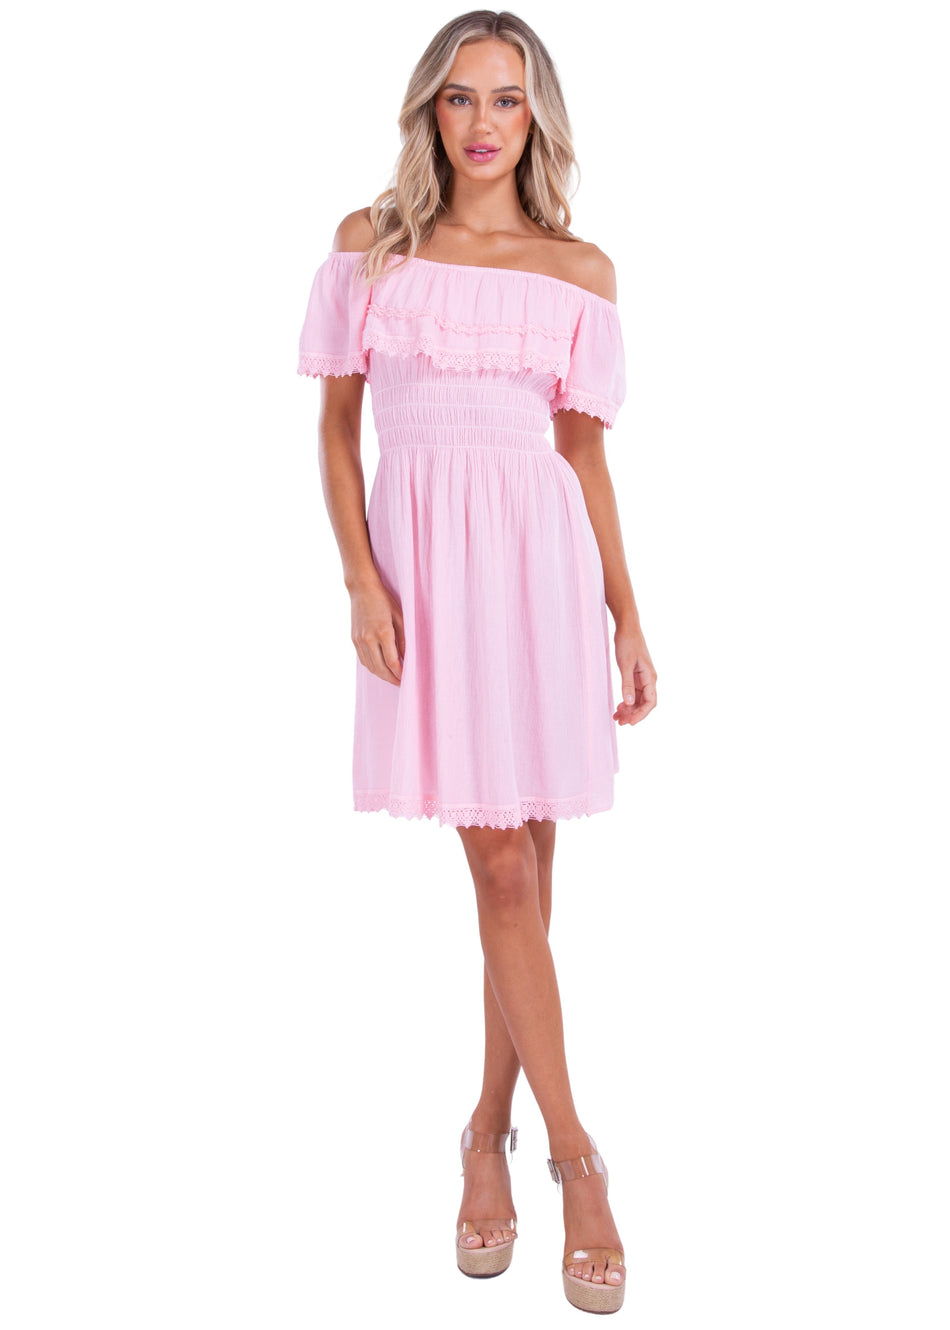 NW1066 - Baby Pink Cotton Dress